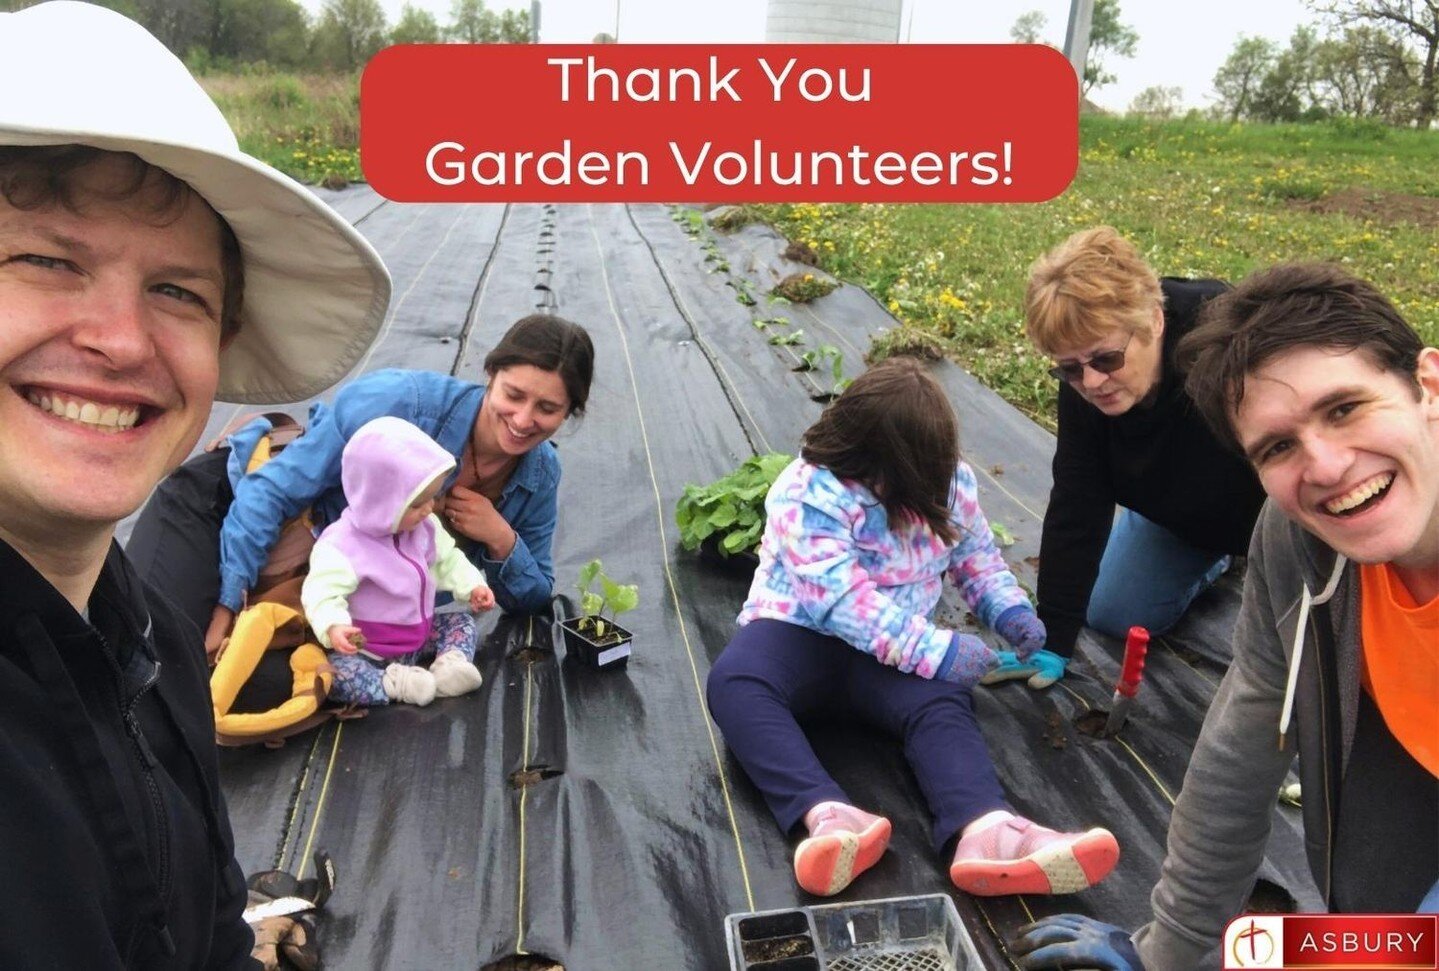 Last Saturday was so much fun preparing the garden with Asbury friends! We weeded, planted, cleaned sheds, and protected chickens! Come out and garden with us on select Saturdays, sign up at AsburyMadison.com/forwardgarden!

#forwardgarden #asburymad